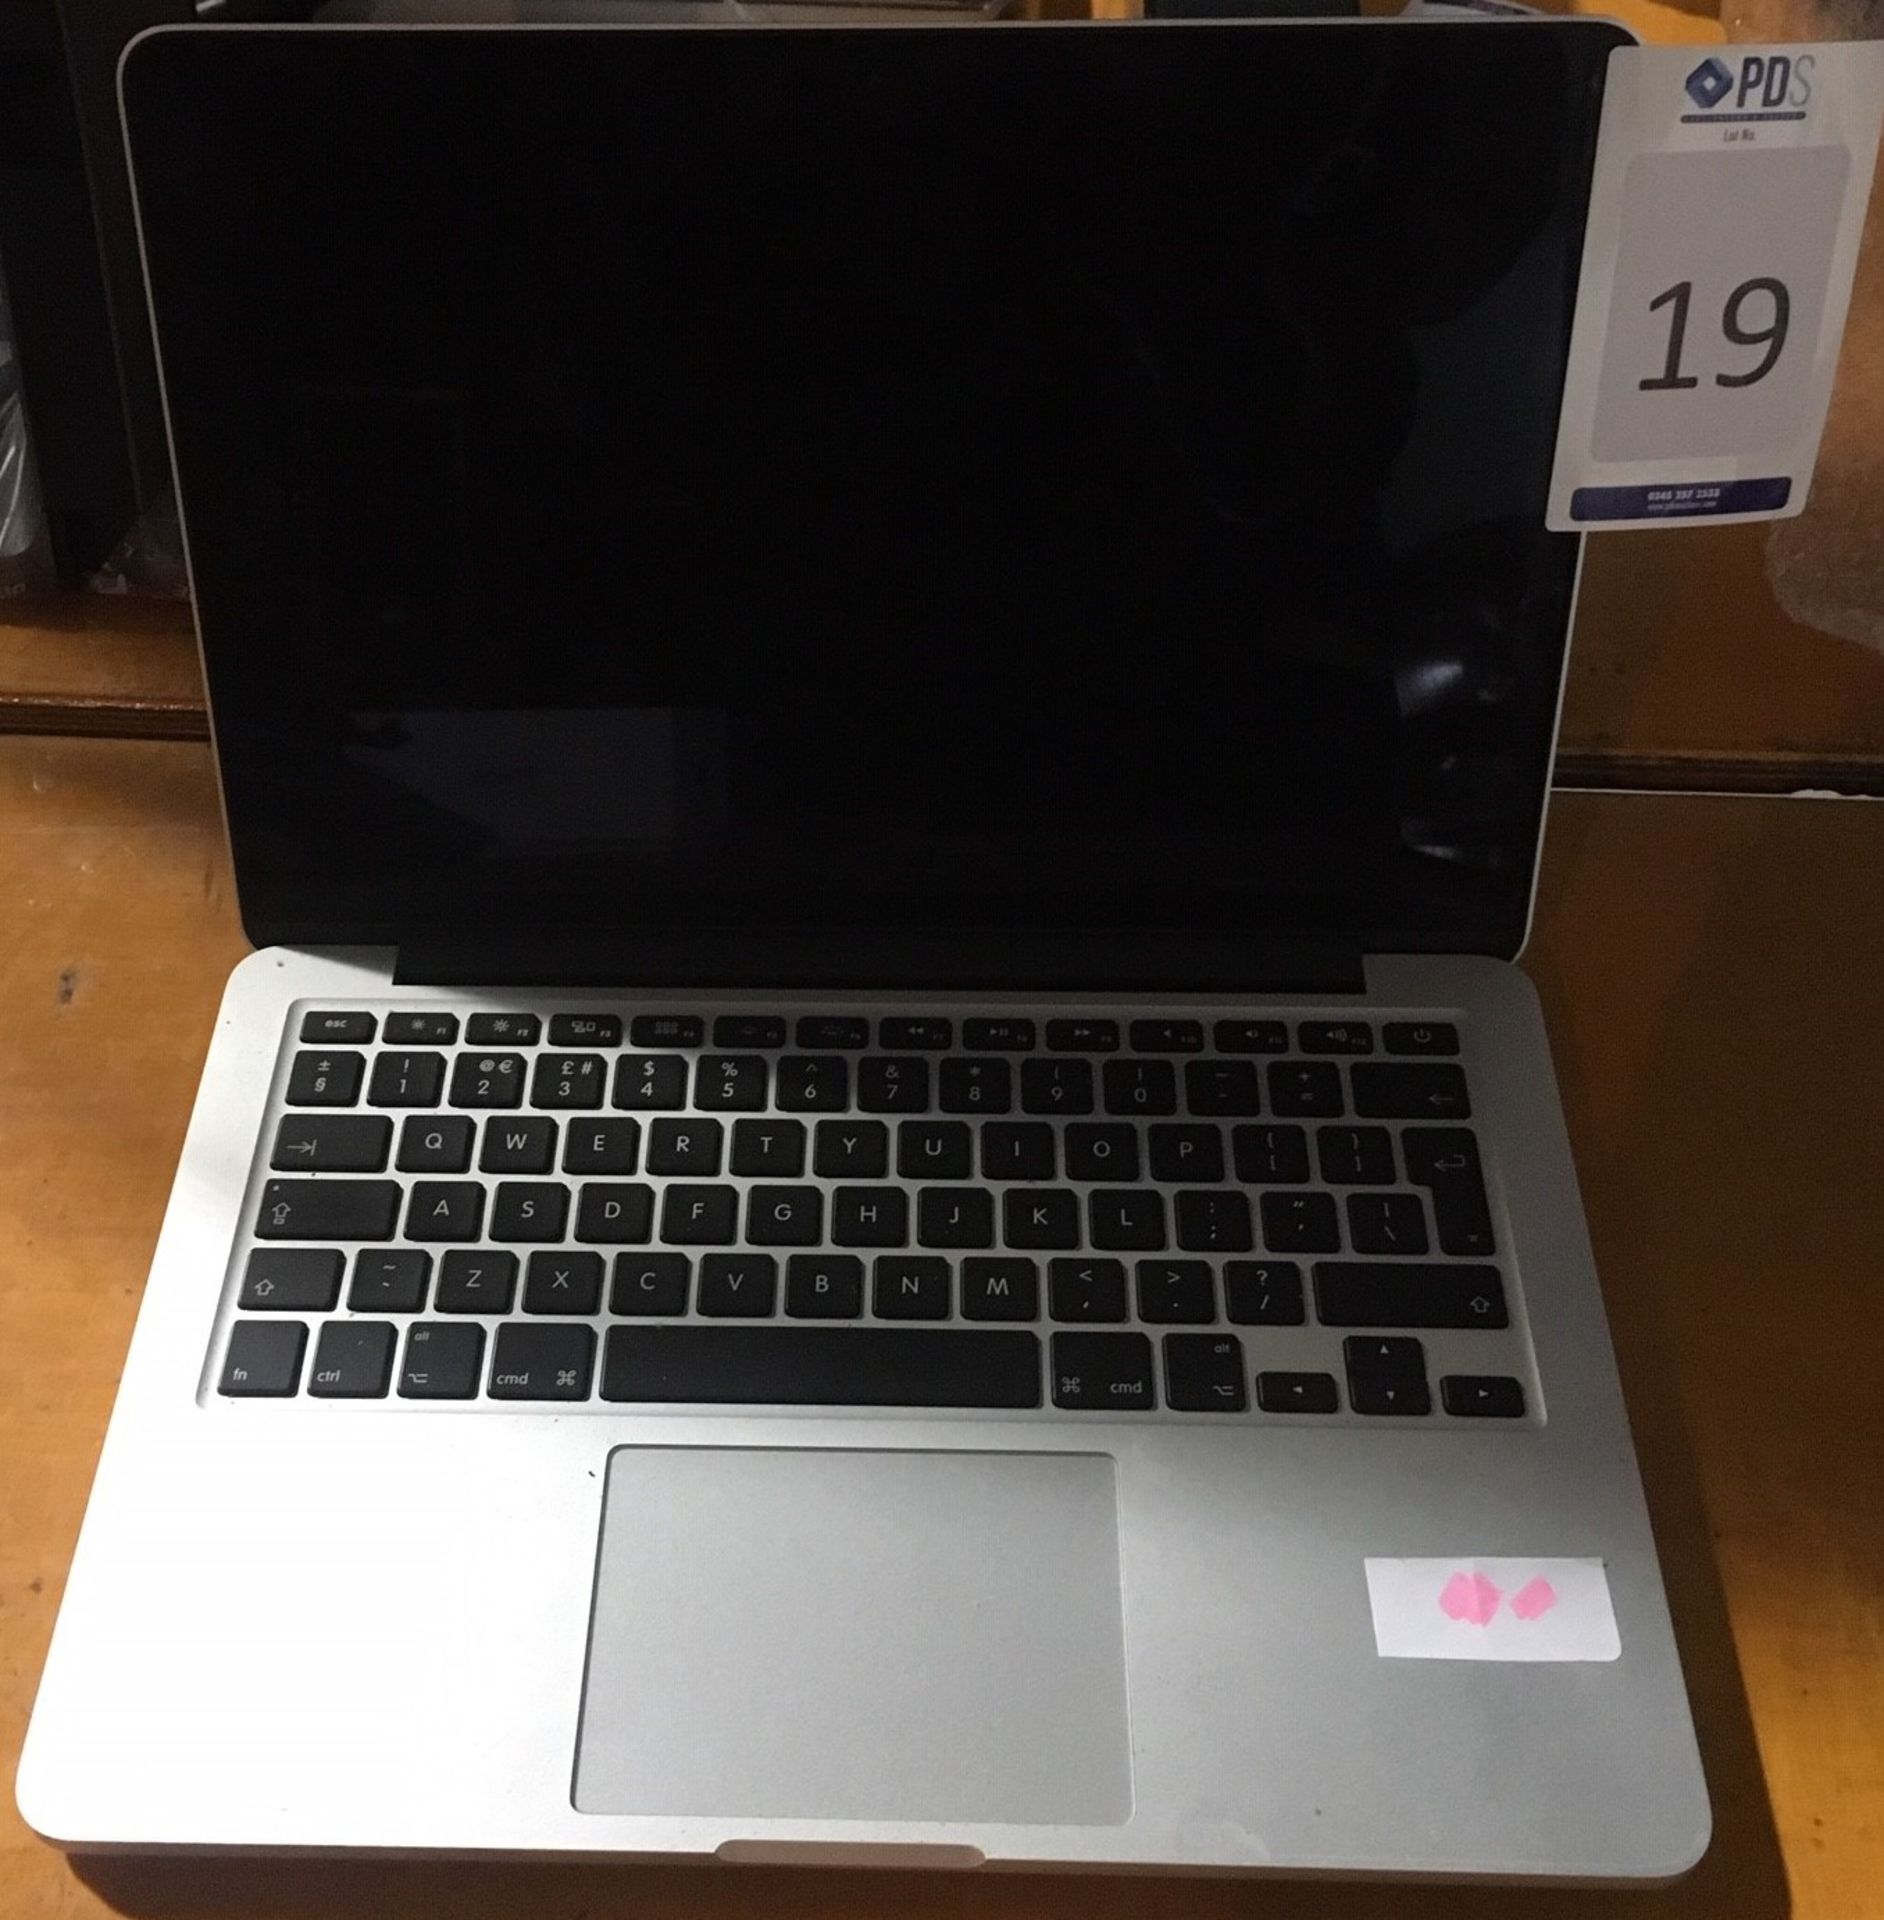 Apple MacBook Pro, 13 Inch Display, 2.7GHz, Core i5, 8GB/128GB (2015), Serial Number: